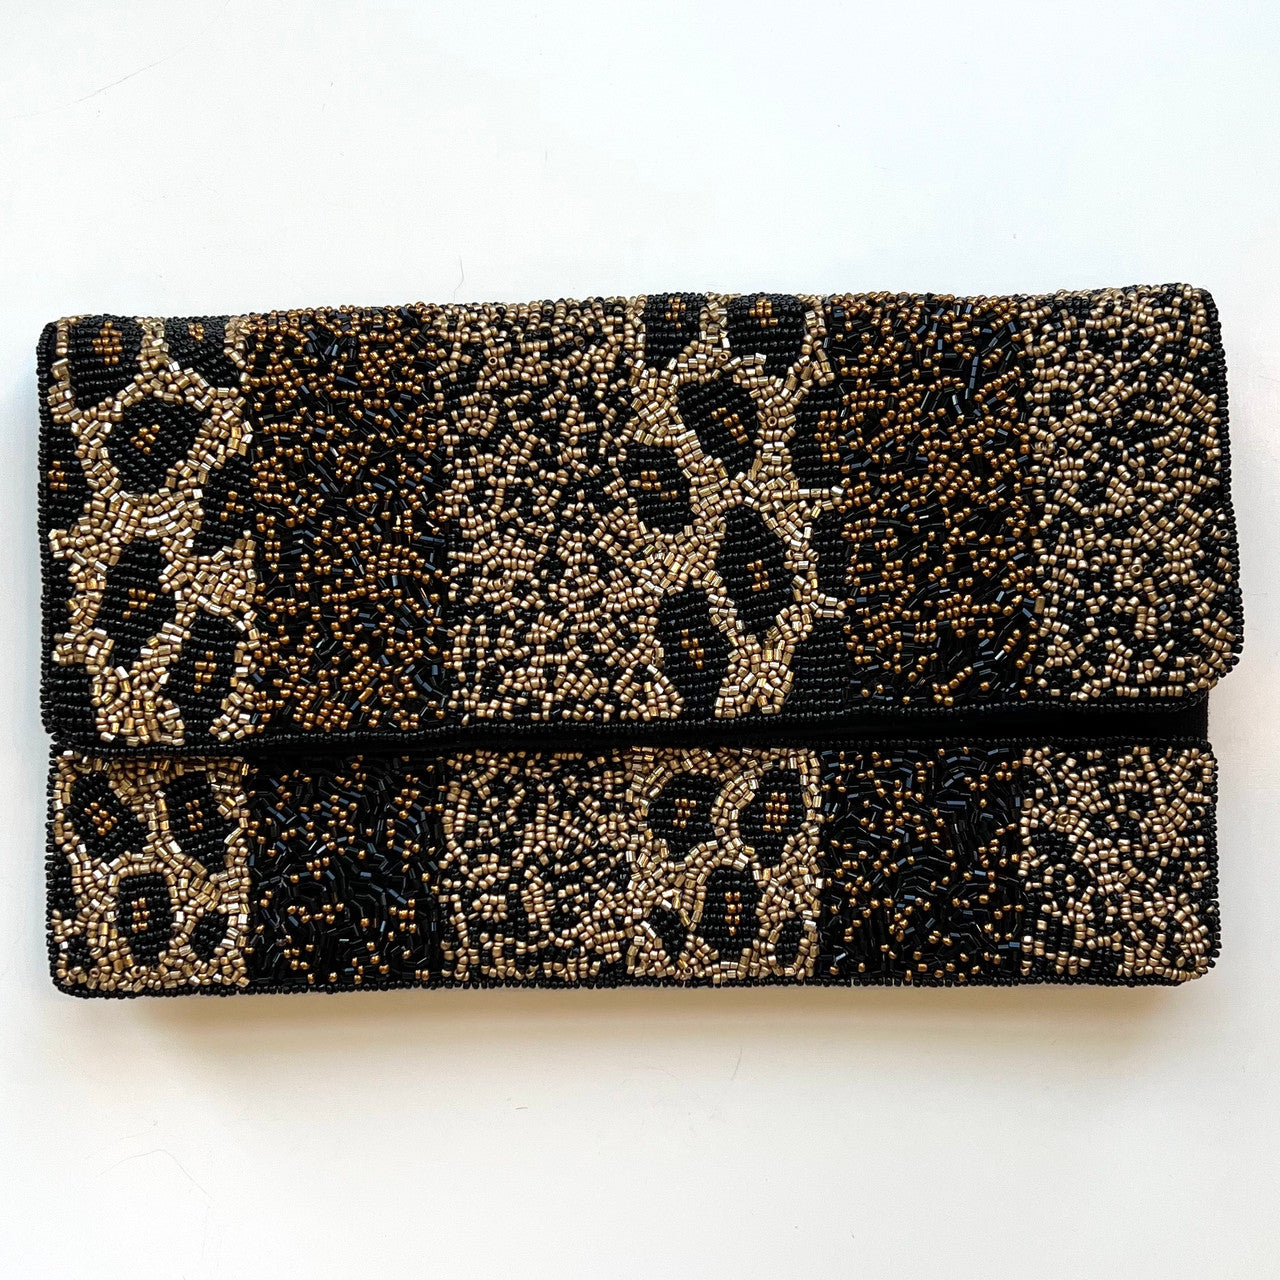 Leopard Ombre Clutch